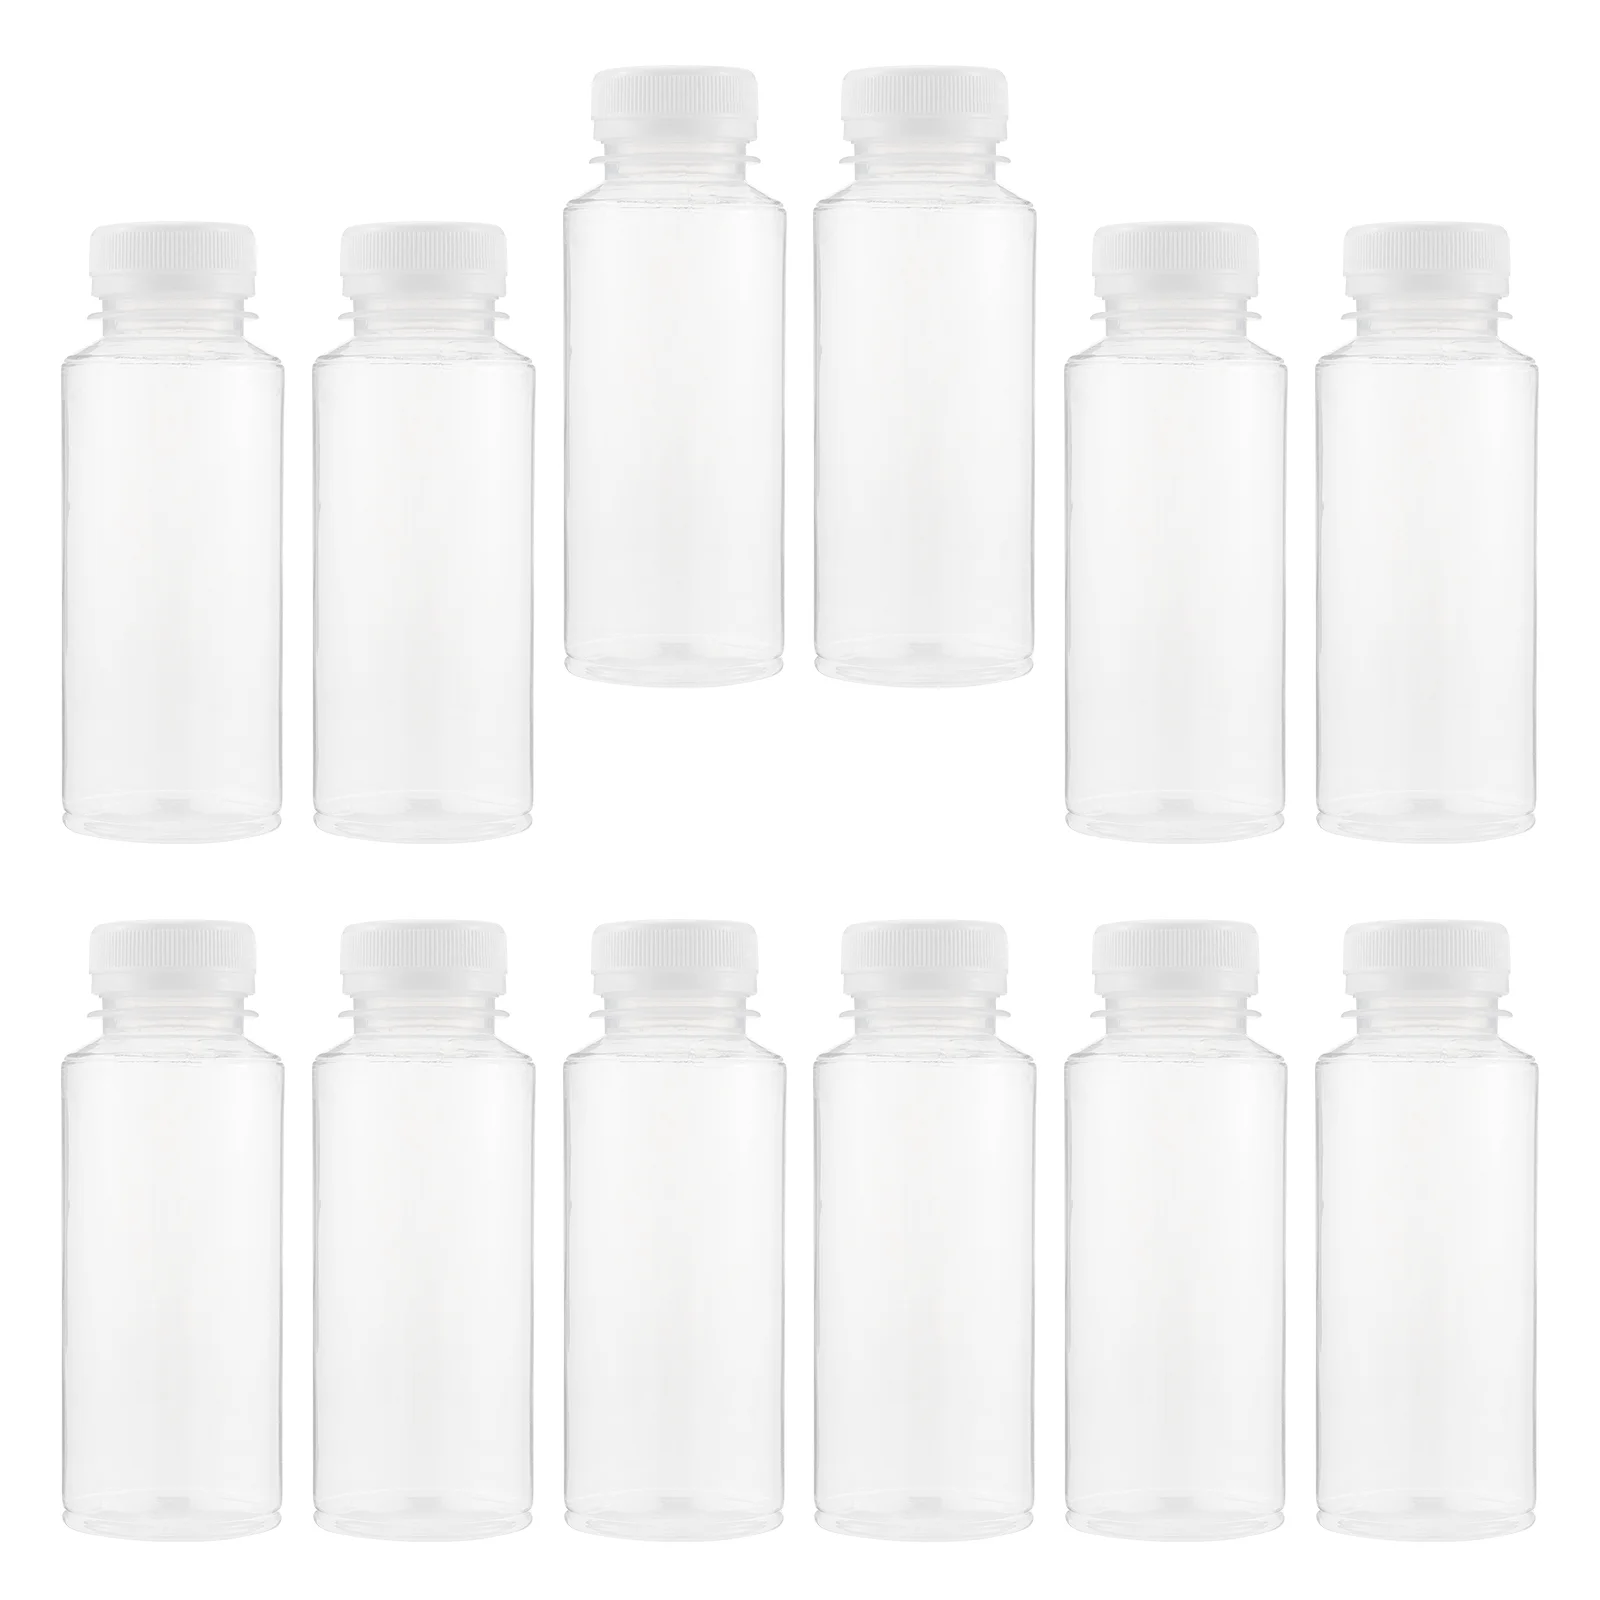 

Plastic Jugs Clearbottlebottles Mini Water Container Lids Tea Carton Tall Empty Jars Airtight Containers Caps